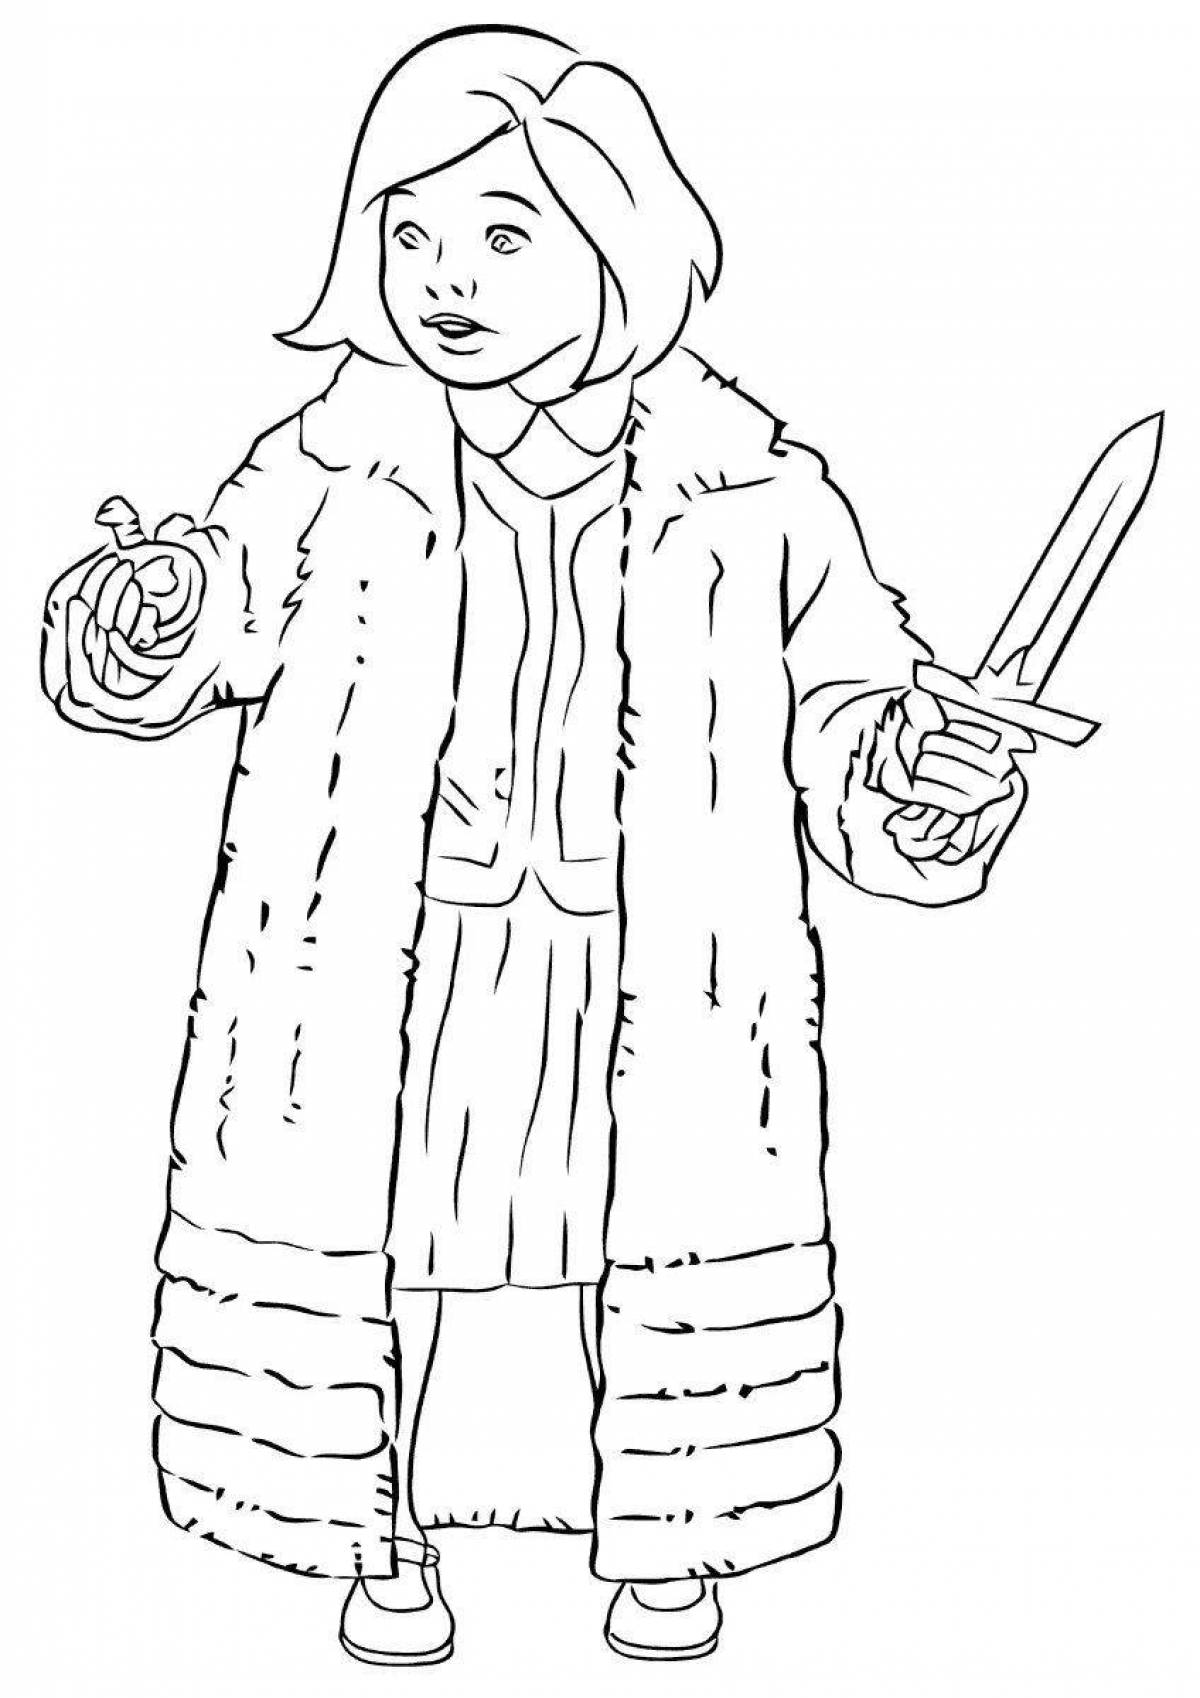 Chronicles of Narnia glitter coloring book